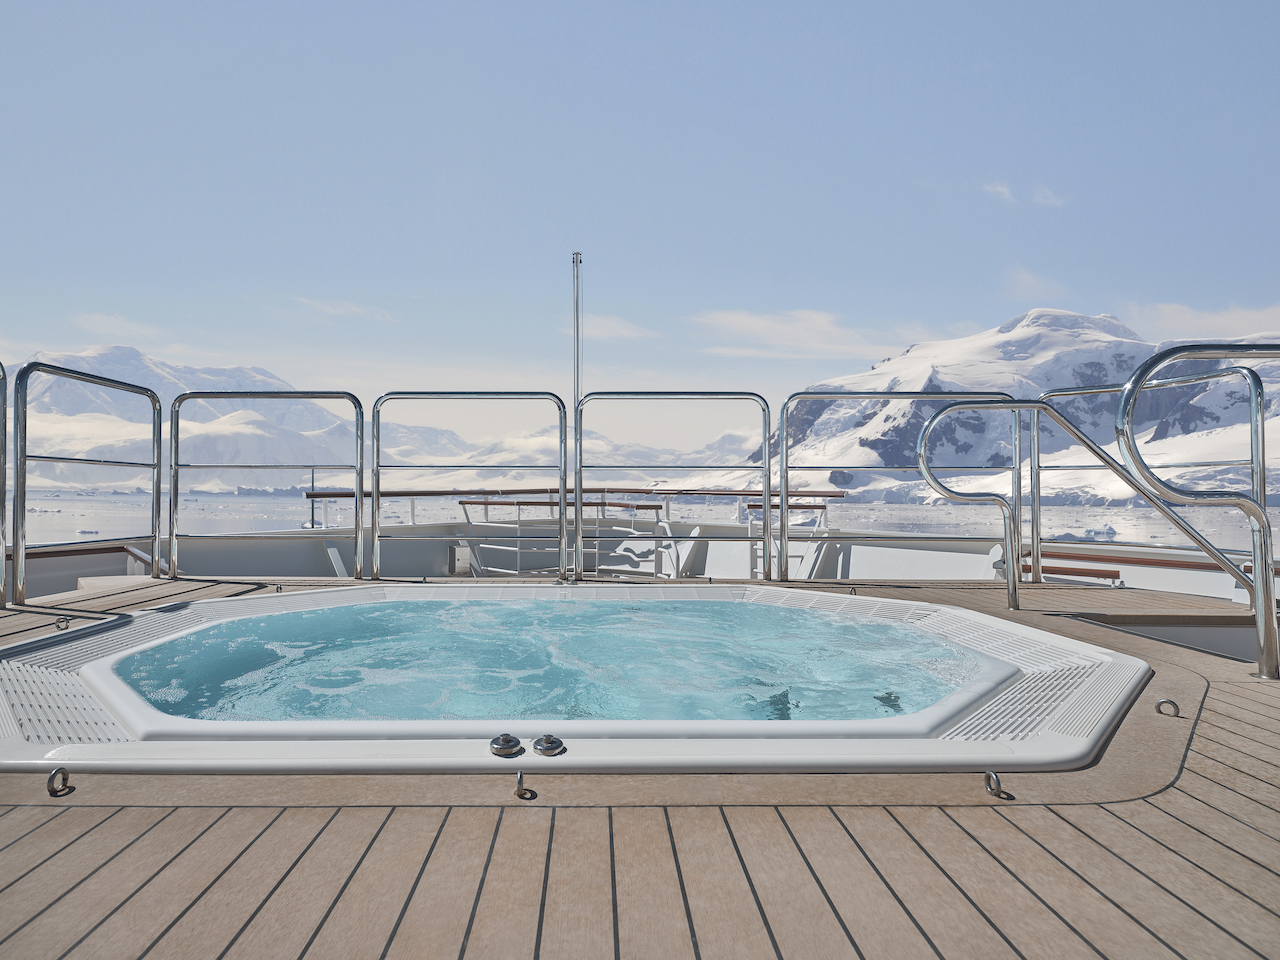 Enhancing the most diverse polar offering in ultra-luxury travel, Silver Endeavour’s new 2024/2025 voyages will take travellers to more than 125 remote destinations across Antarctica, the Arctic, the British Isles, and Iceland